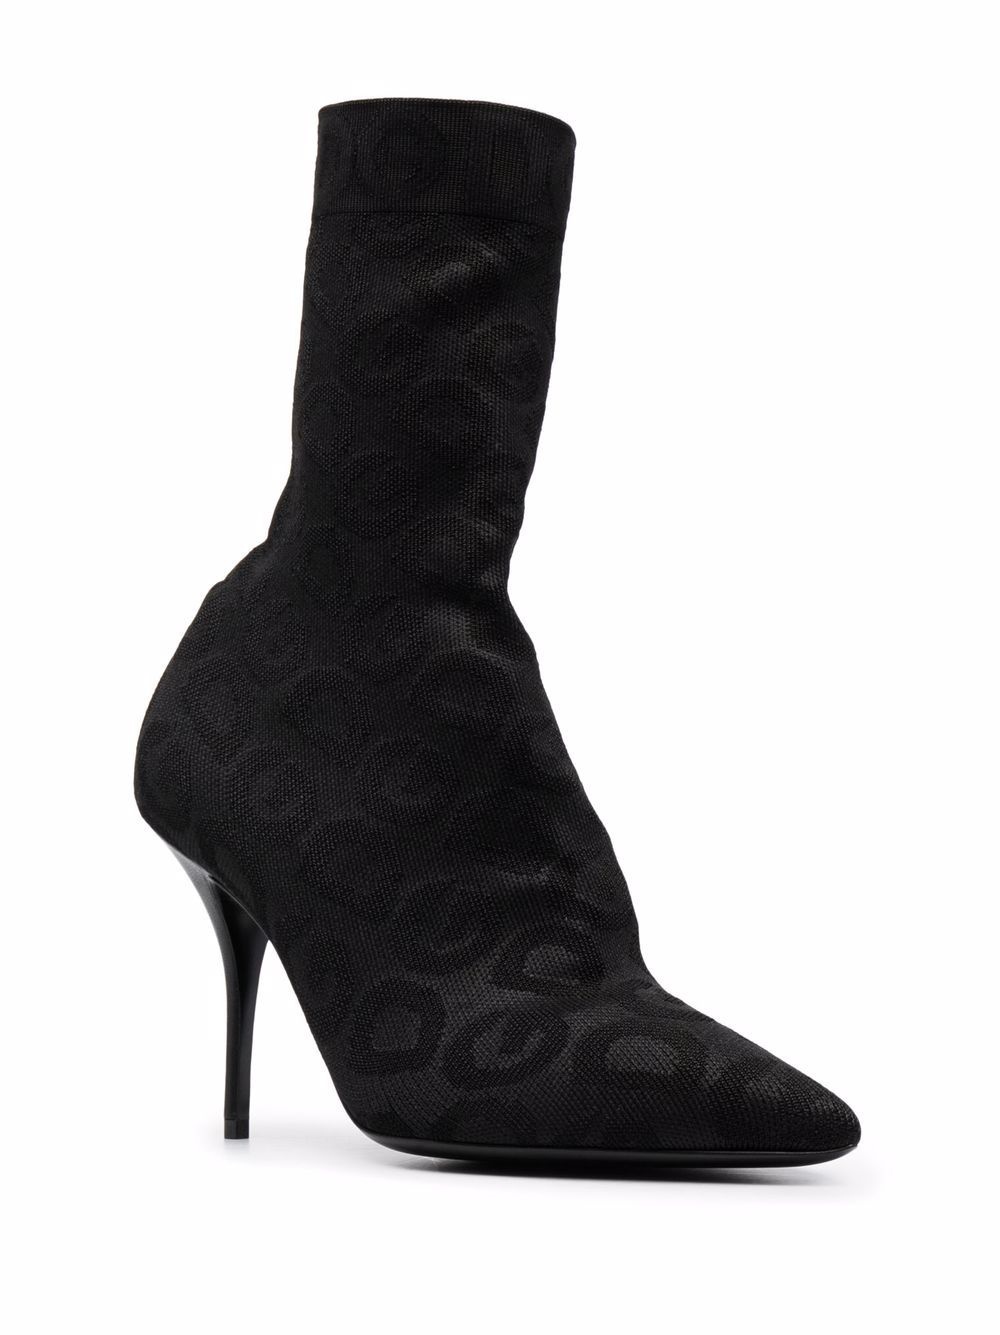 monogram ankle boots - 2